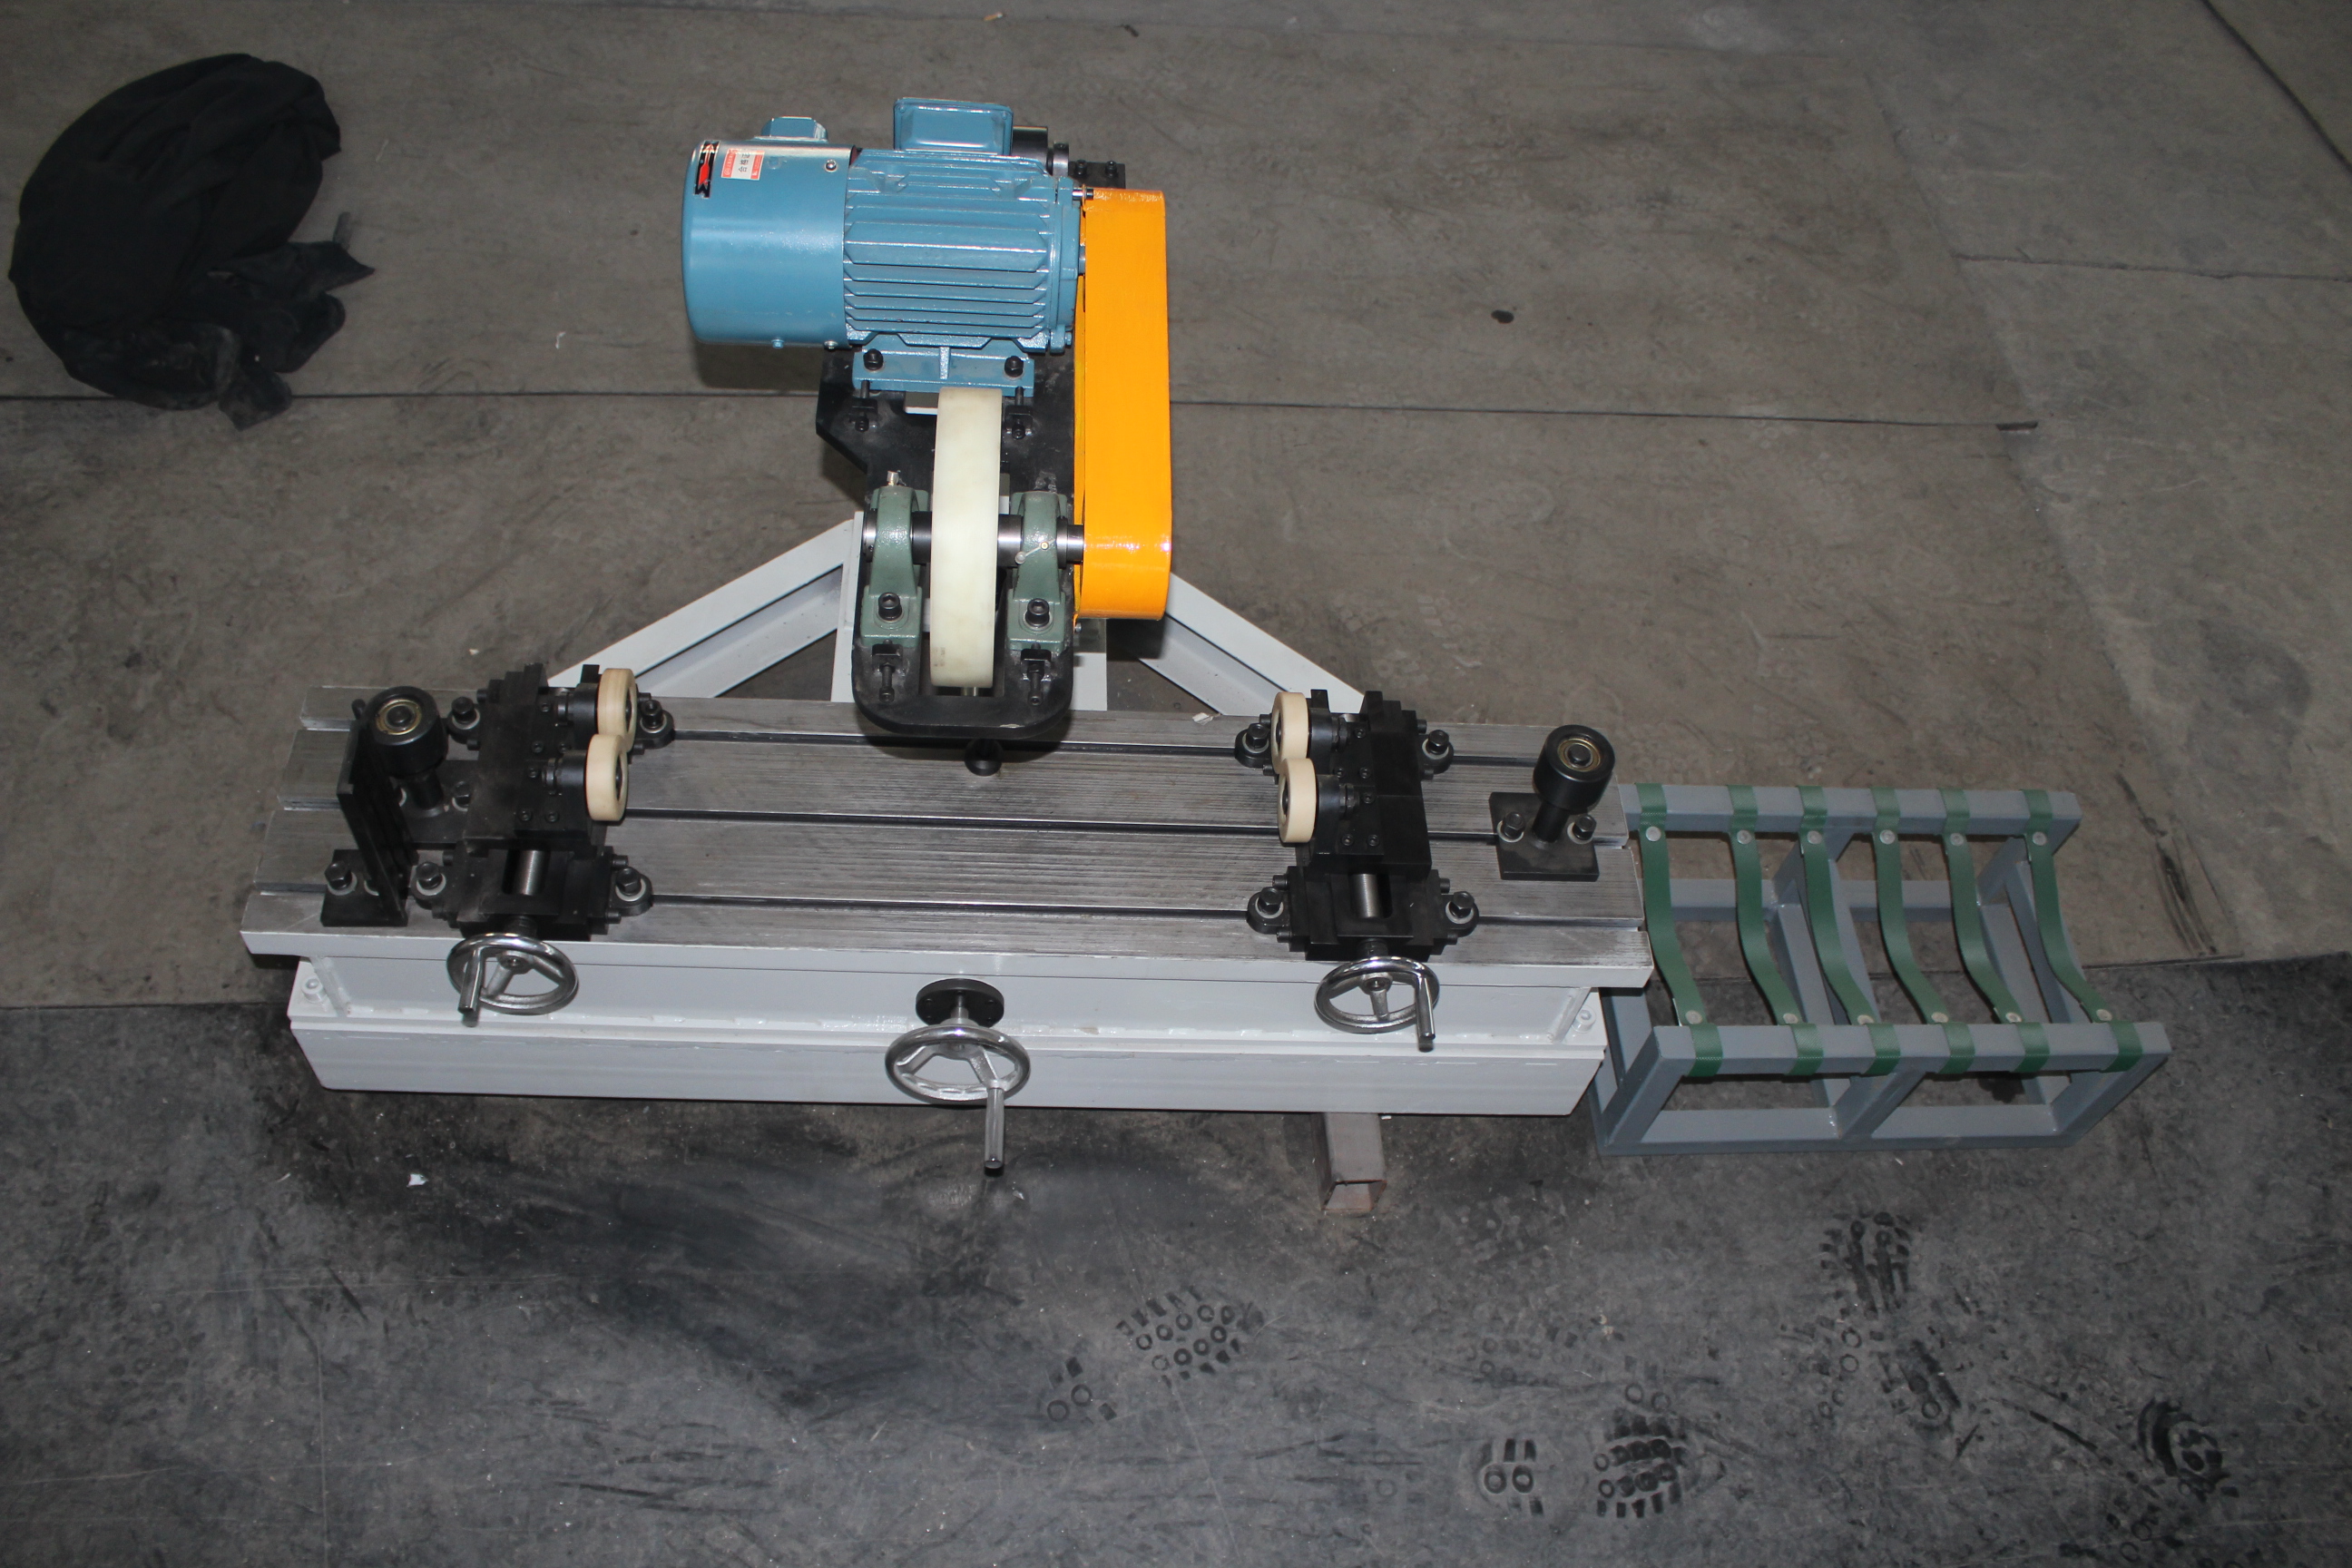 The Test-bed for Rotation Resistance of Roller